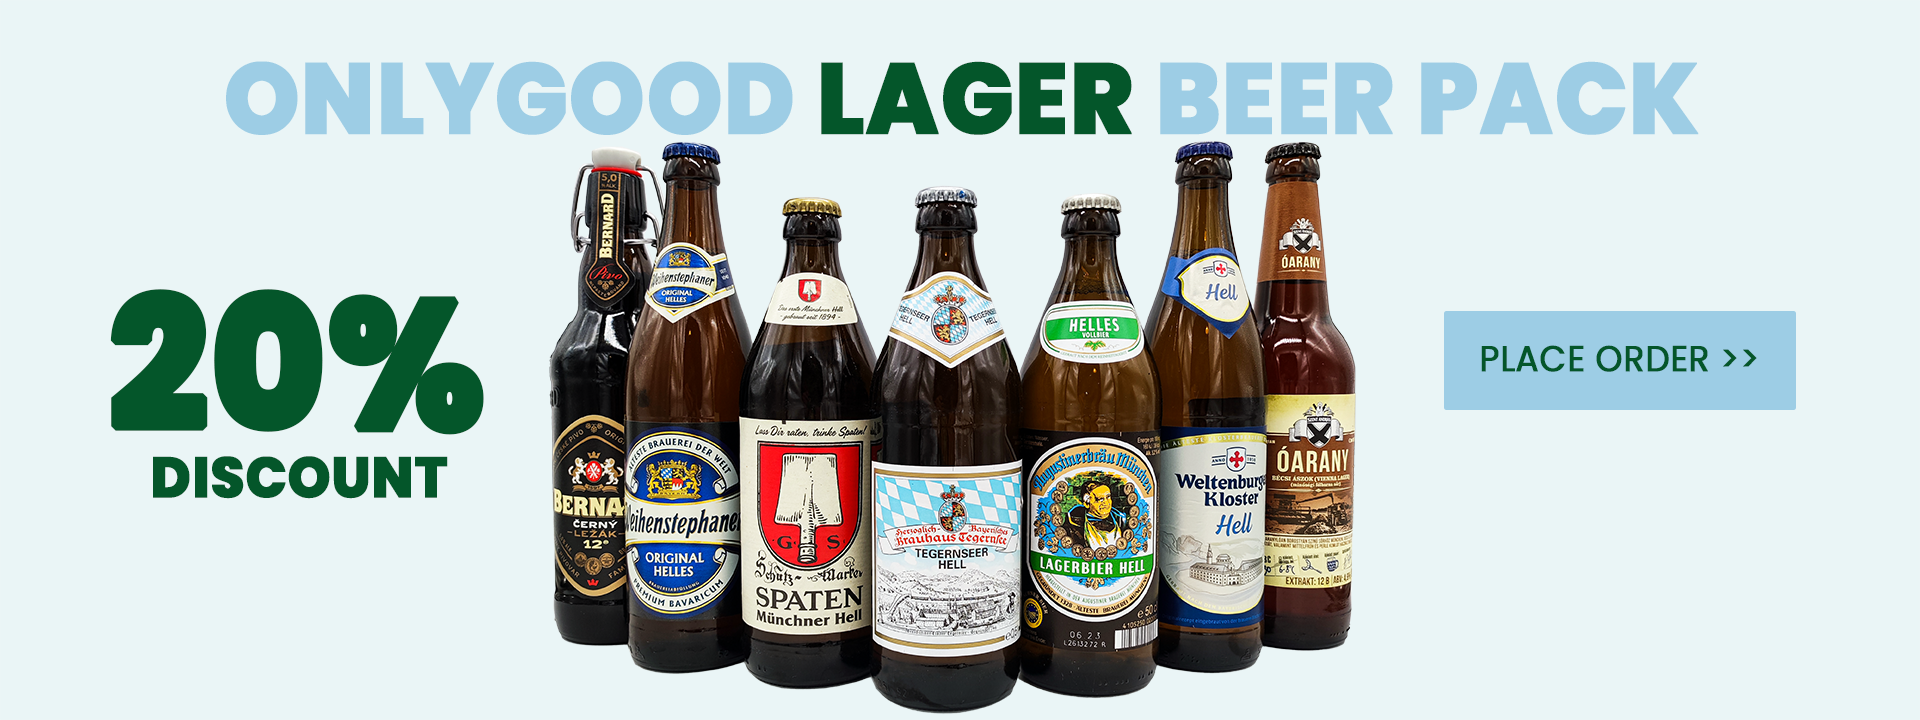 OnlygoodLAGER